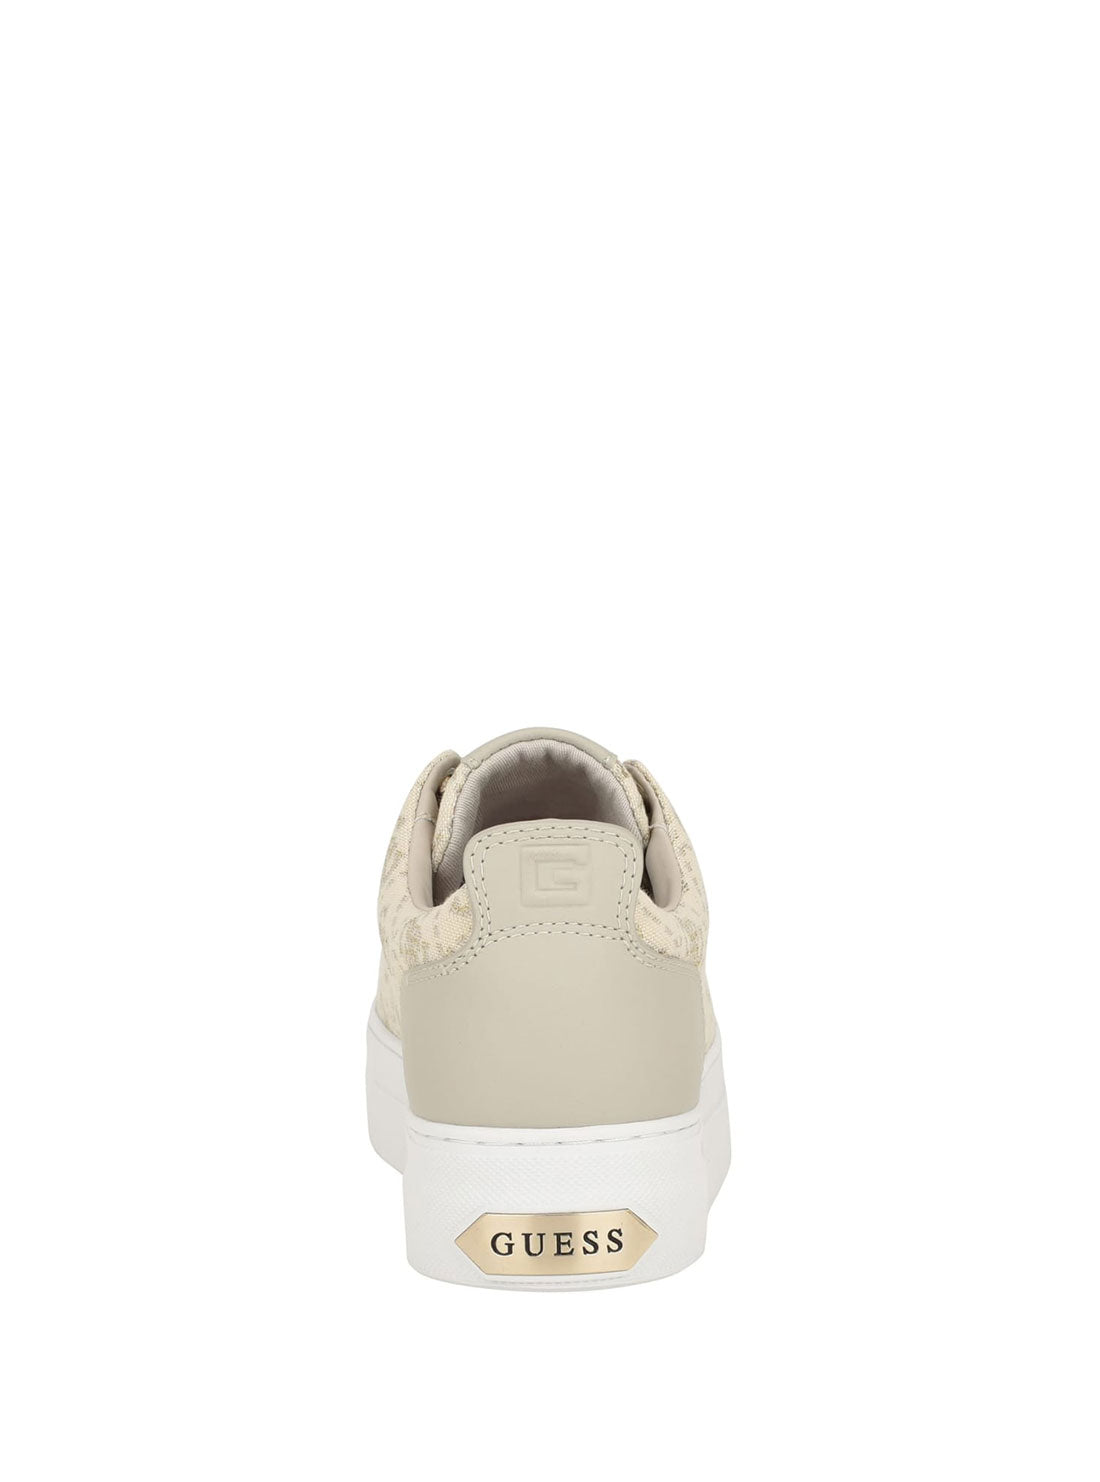 GUESS Gold Logo Giaa Low-Top Sneakers back view